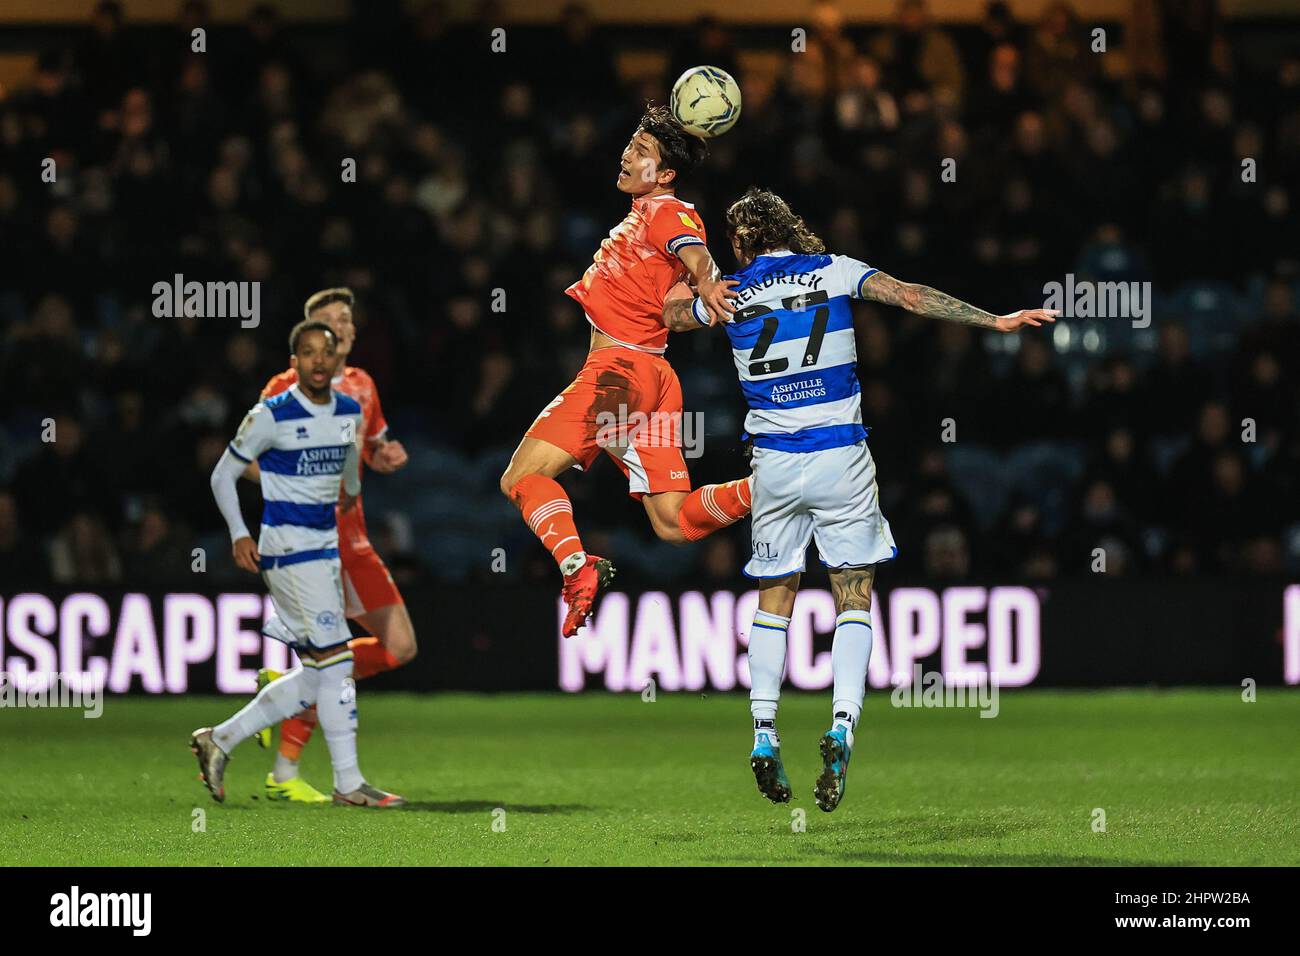 London, UK. 23rd Feb, 2022. Kenny Dougall #12 of Blackpool and Jeff Hendrick #27 of Queens Park Rangers battle for the ball in London, United Kingdom on 2/23/2022. (Photo by Mark Cosgrove/News Images/Sipa USA) Credit: Sipa USA/Alamy Live News Stock Photo